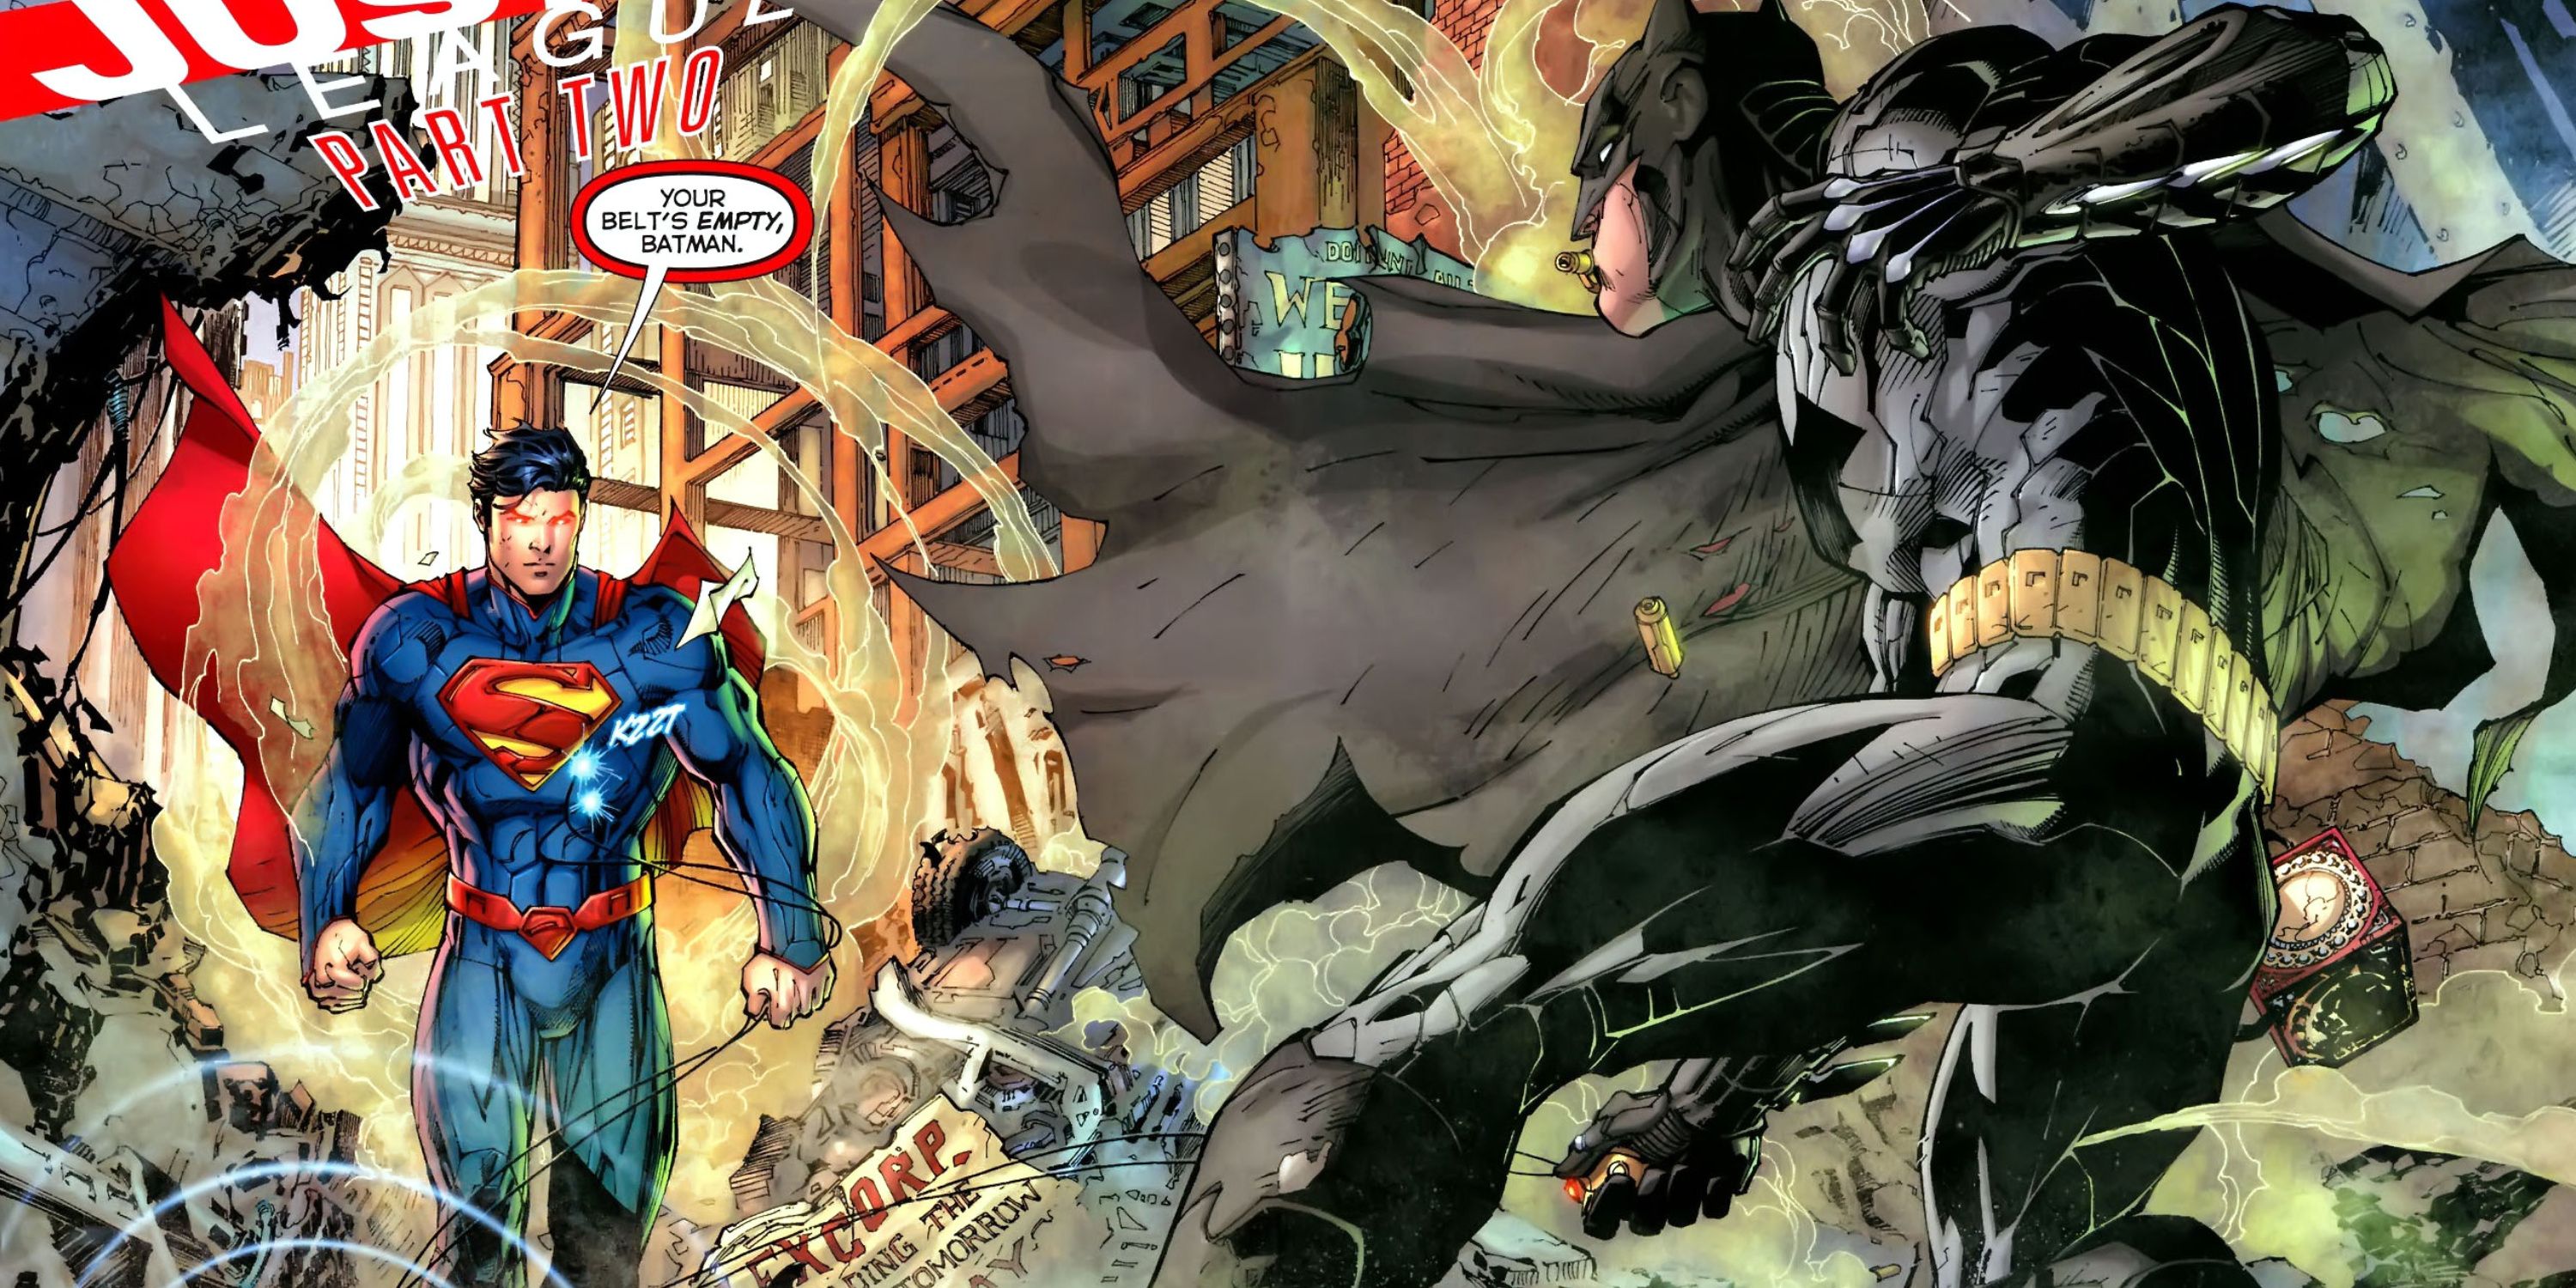 Superman and Batman's first meeting in the New 52